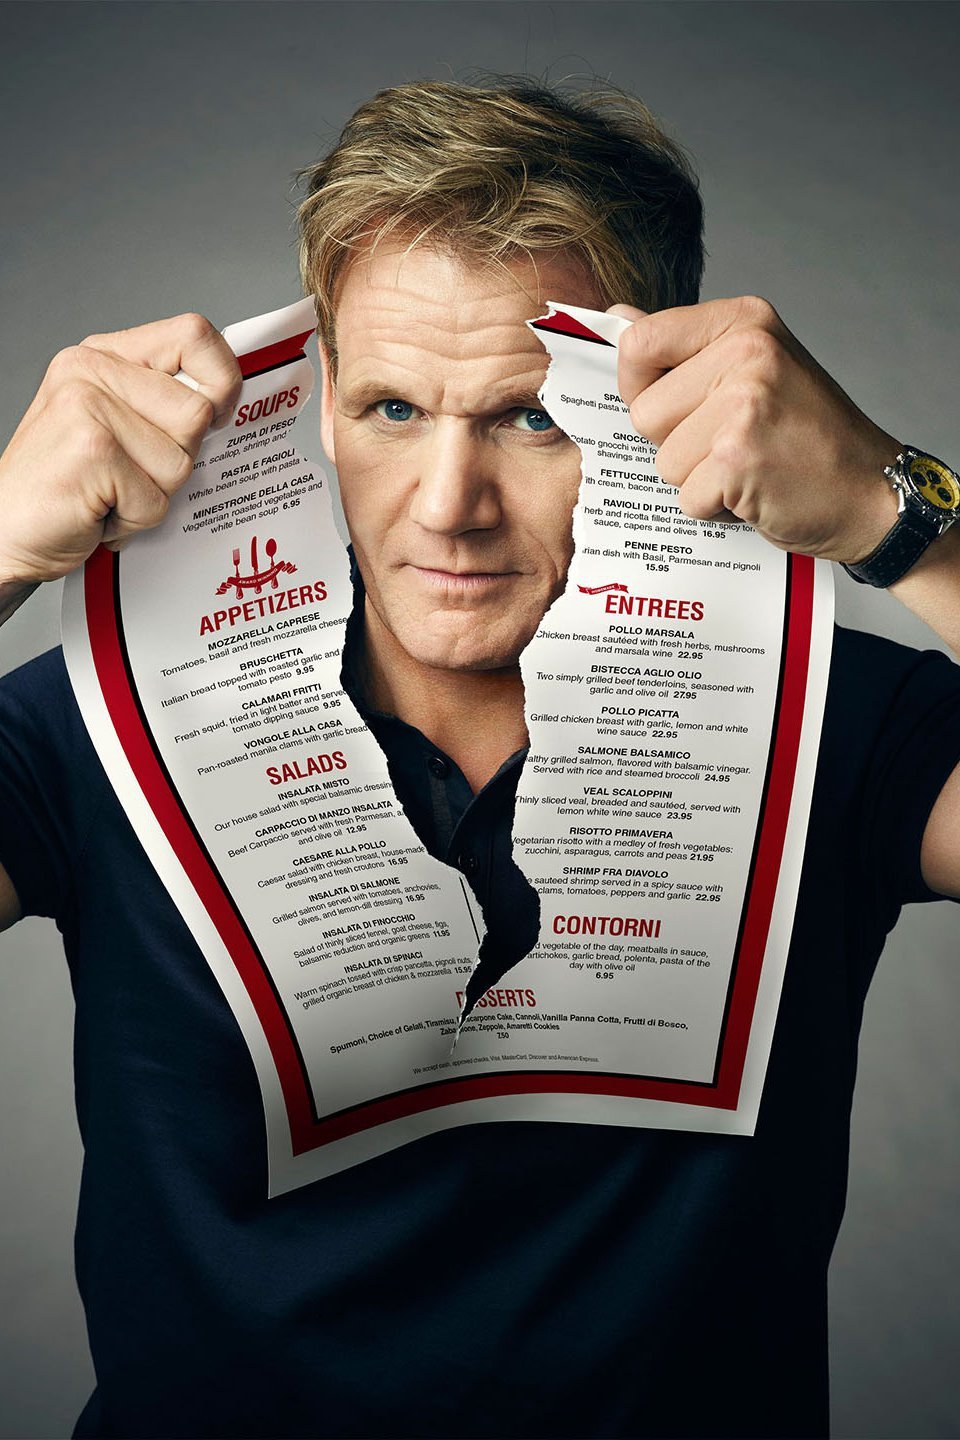 Kitchen Nightmares Season 2 Episodes Streaming Online for Free   The ...